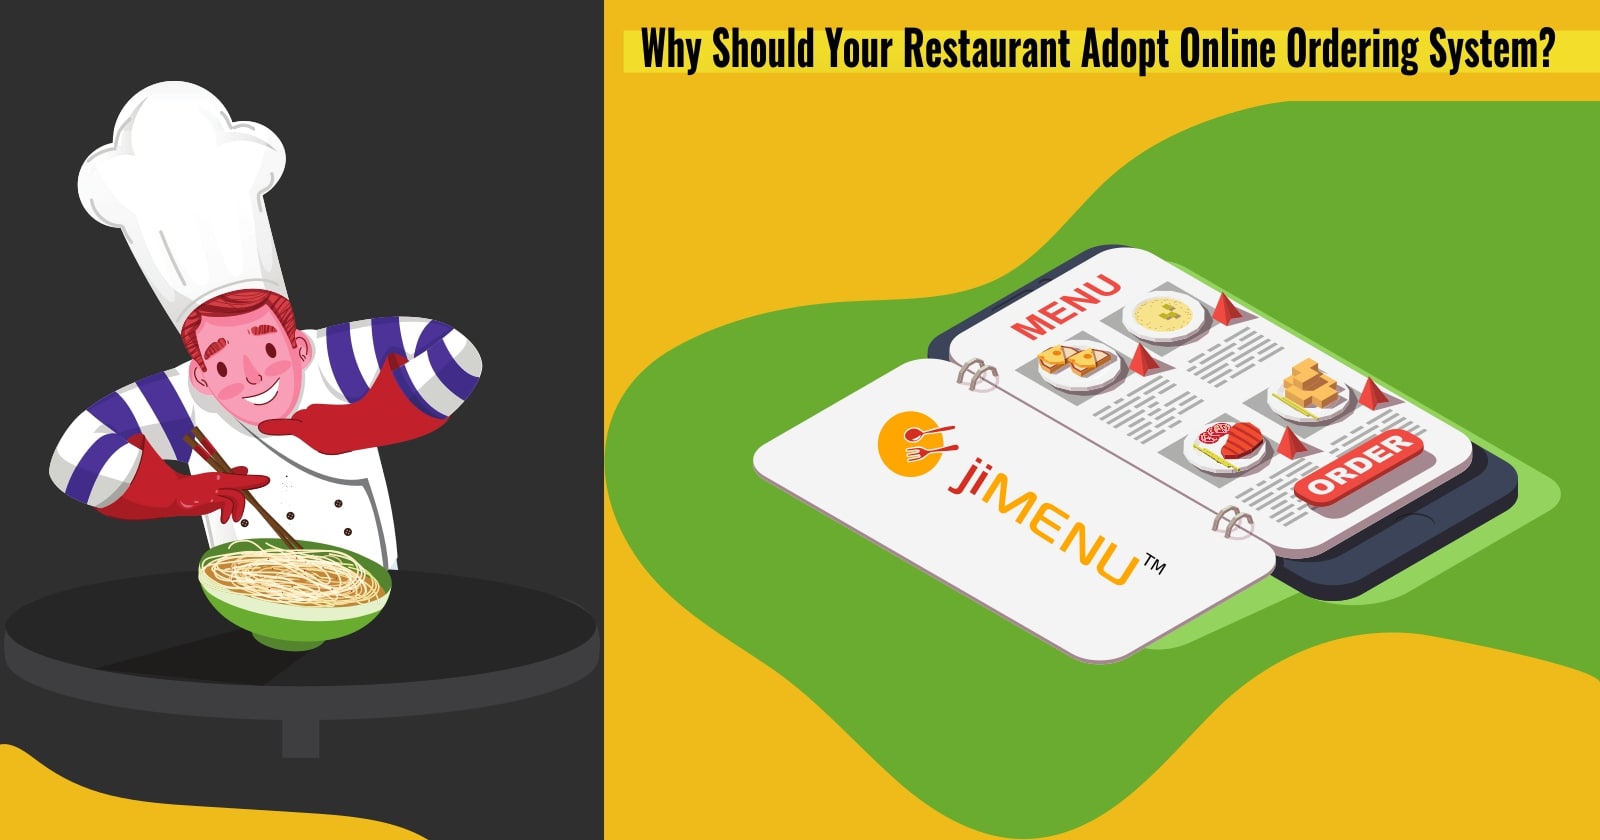 Why Should Your Restaurant Adopt Online Ordering System?